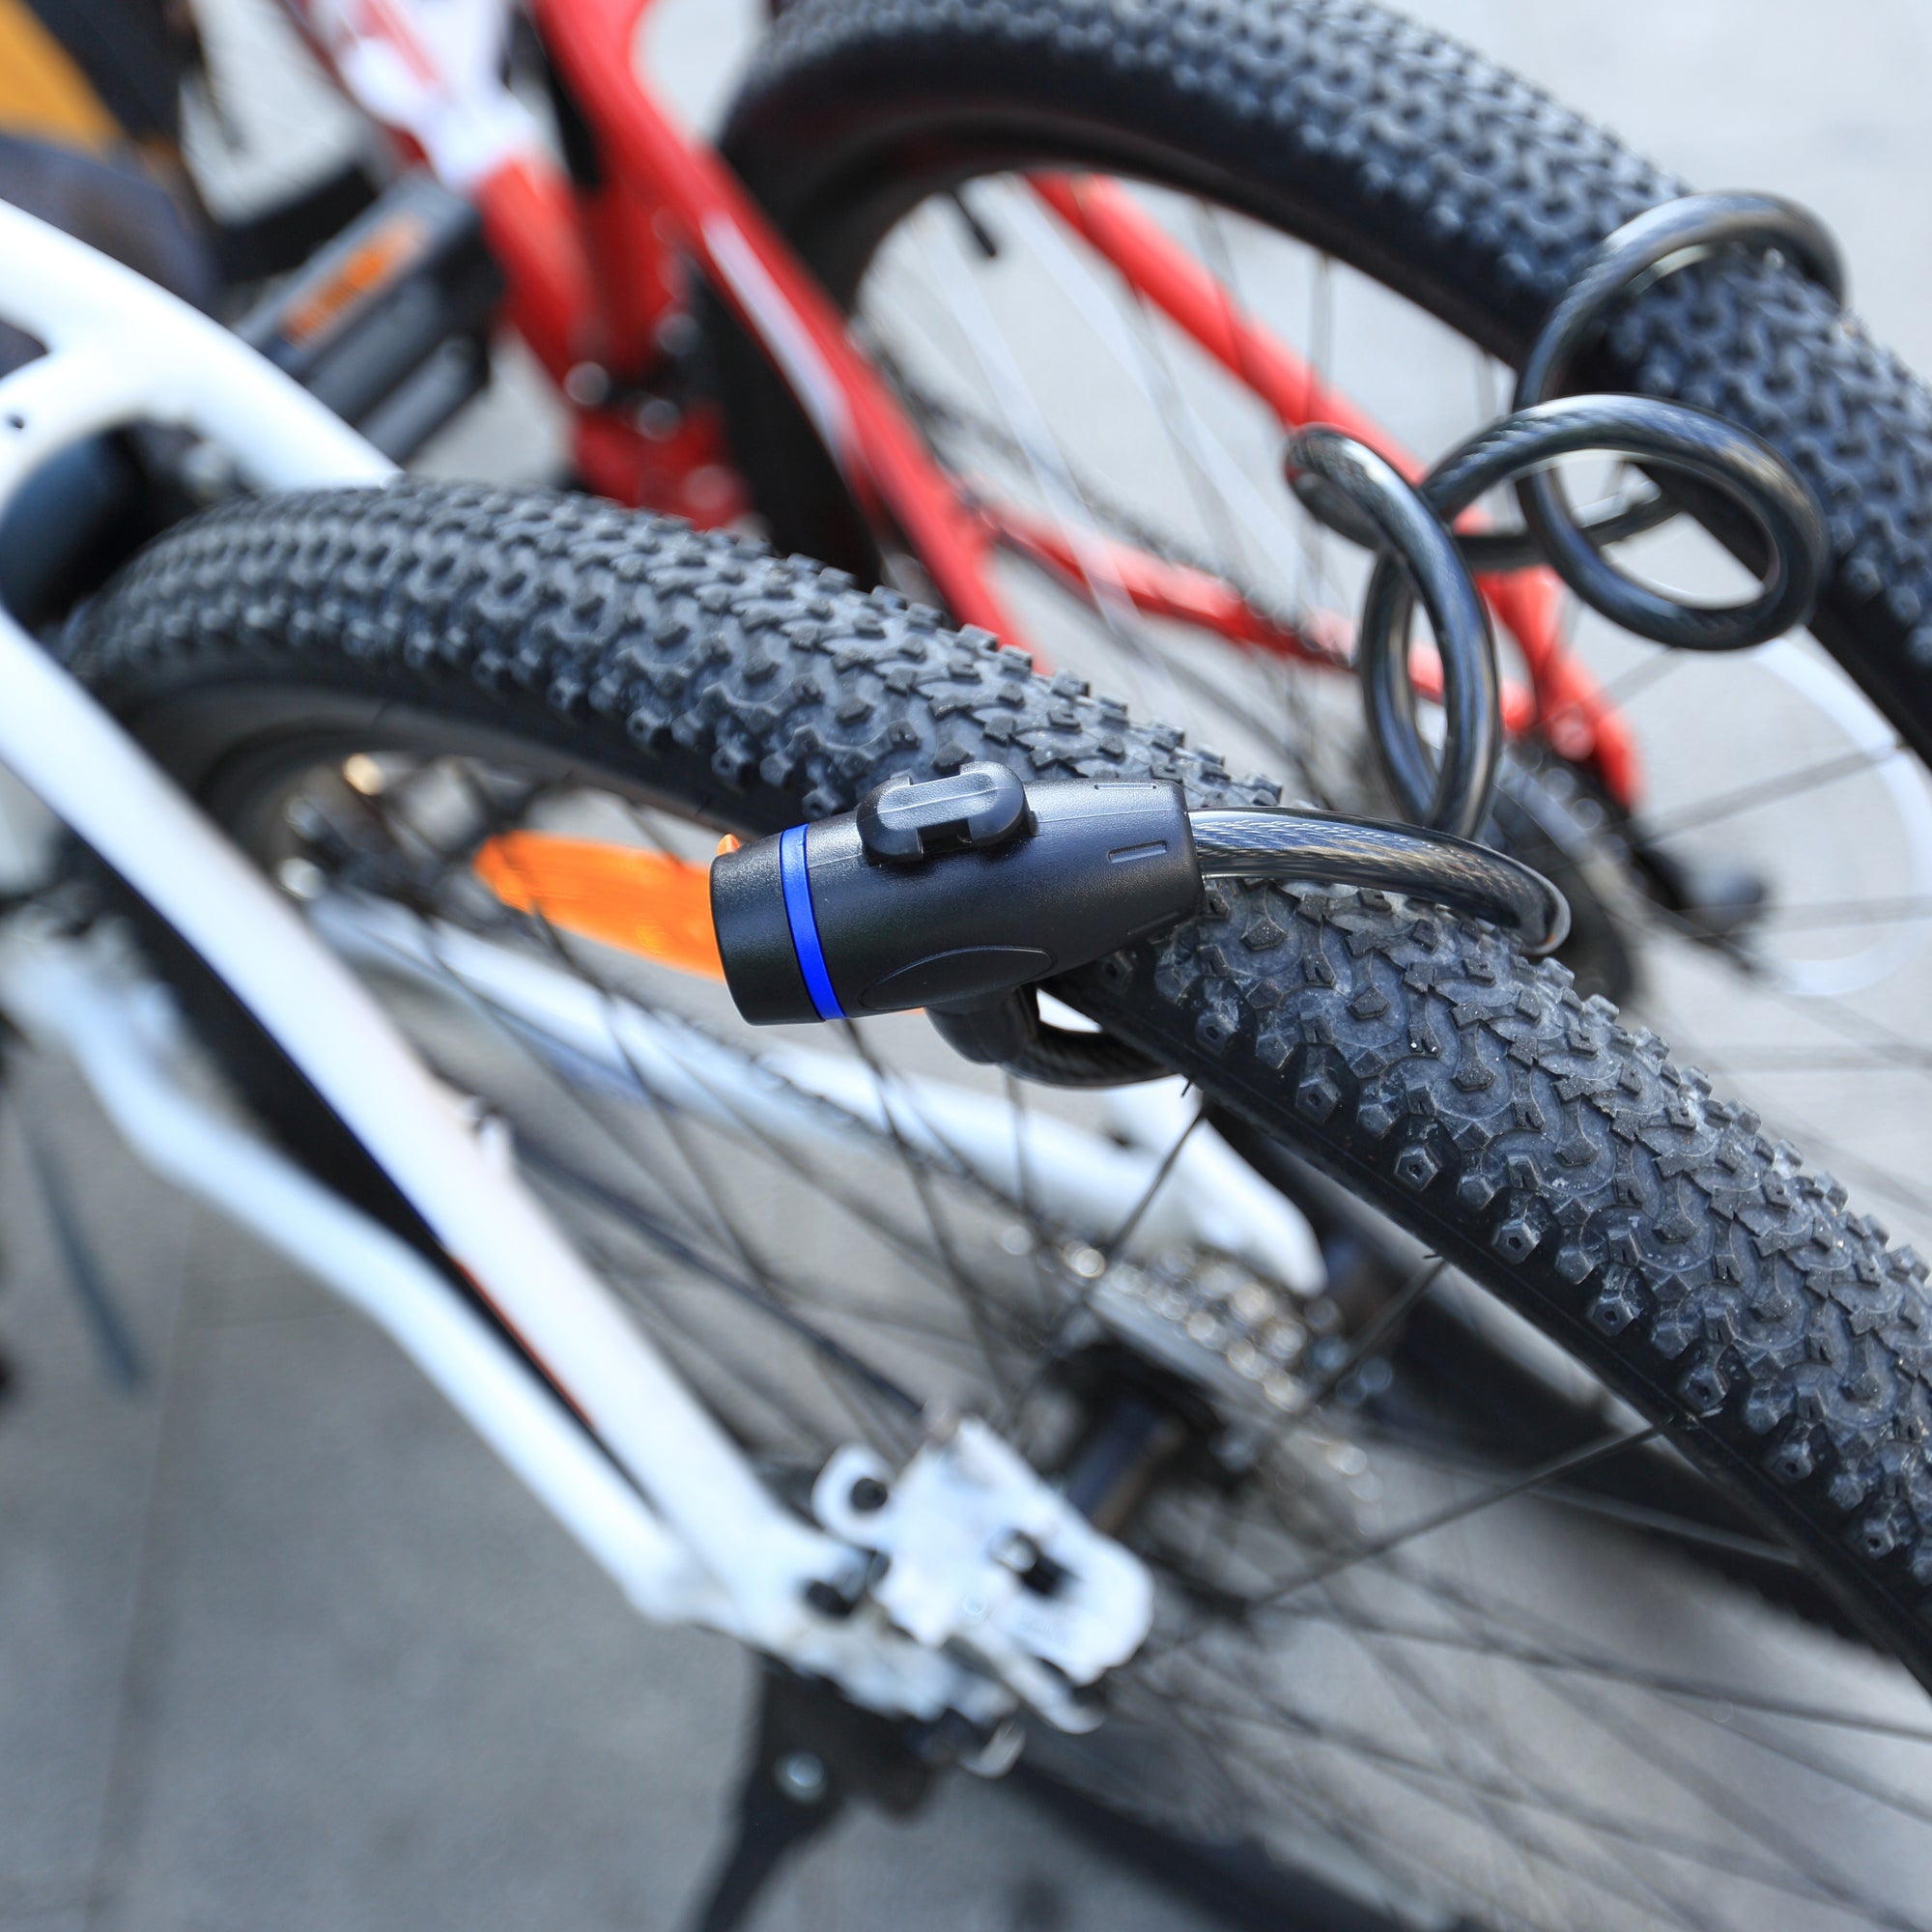 5 Creative Ways To Protect Your Bike From Theft